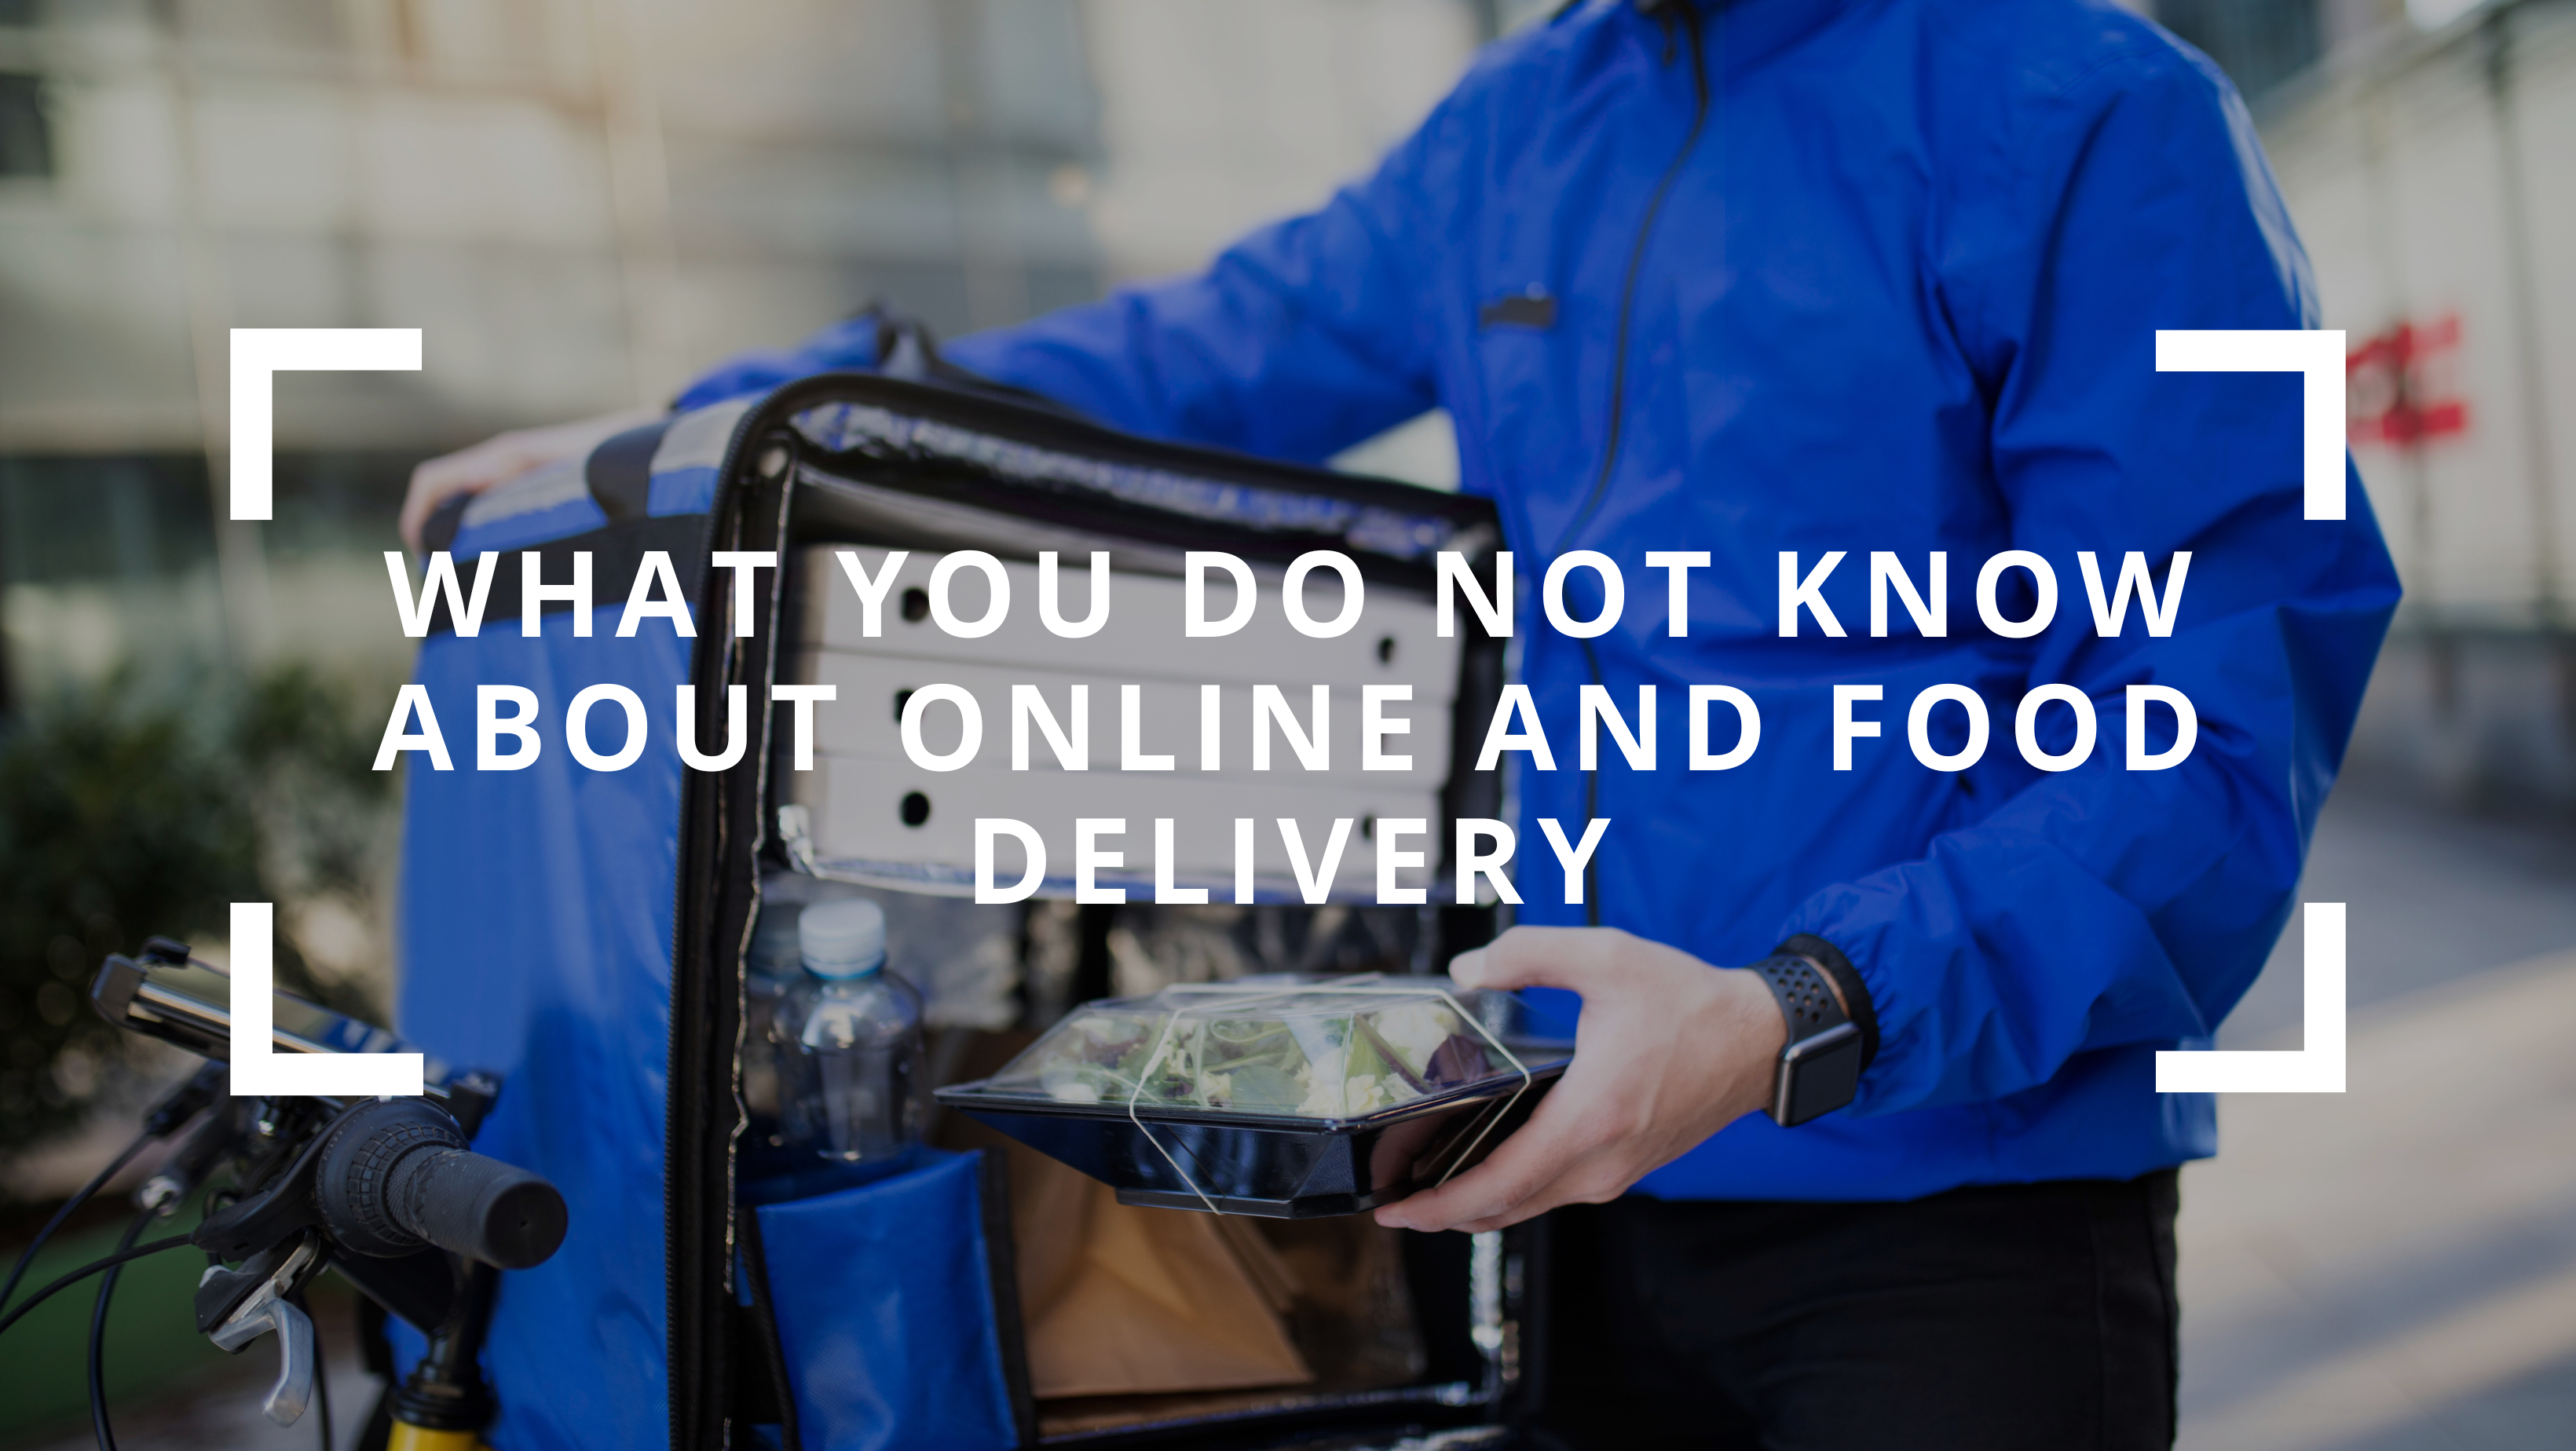 What You Do Not Know About Online and Food Delivery